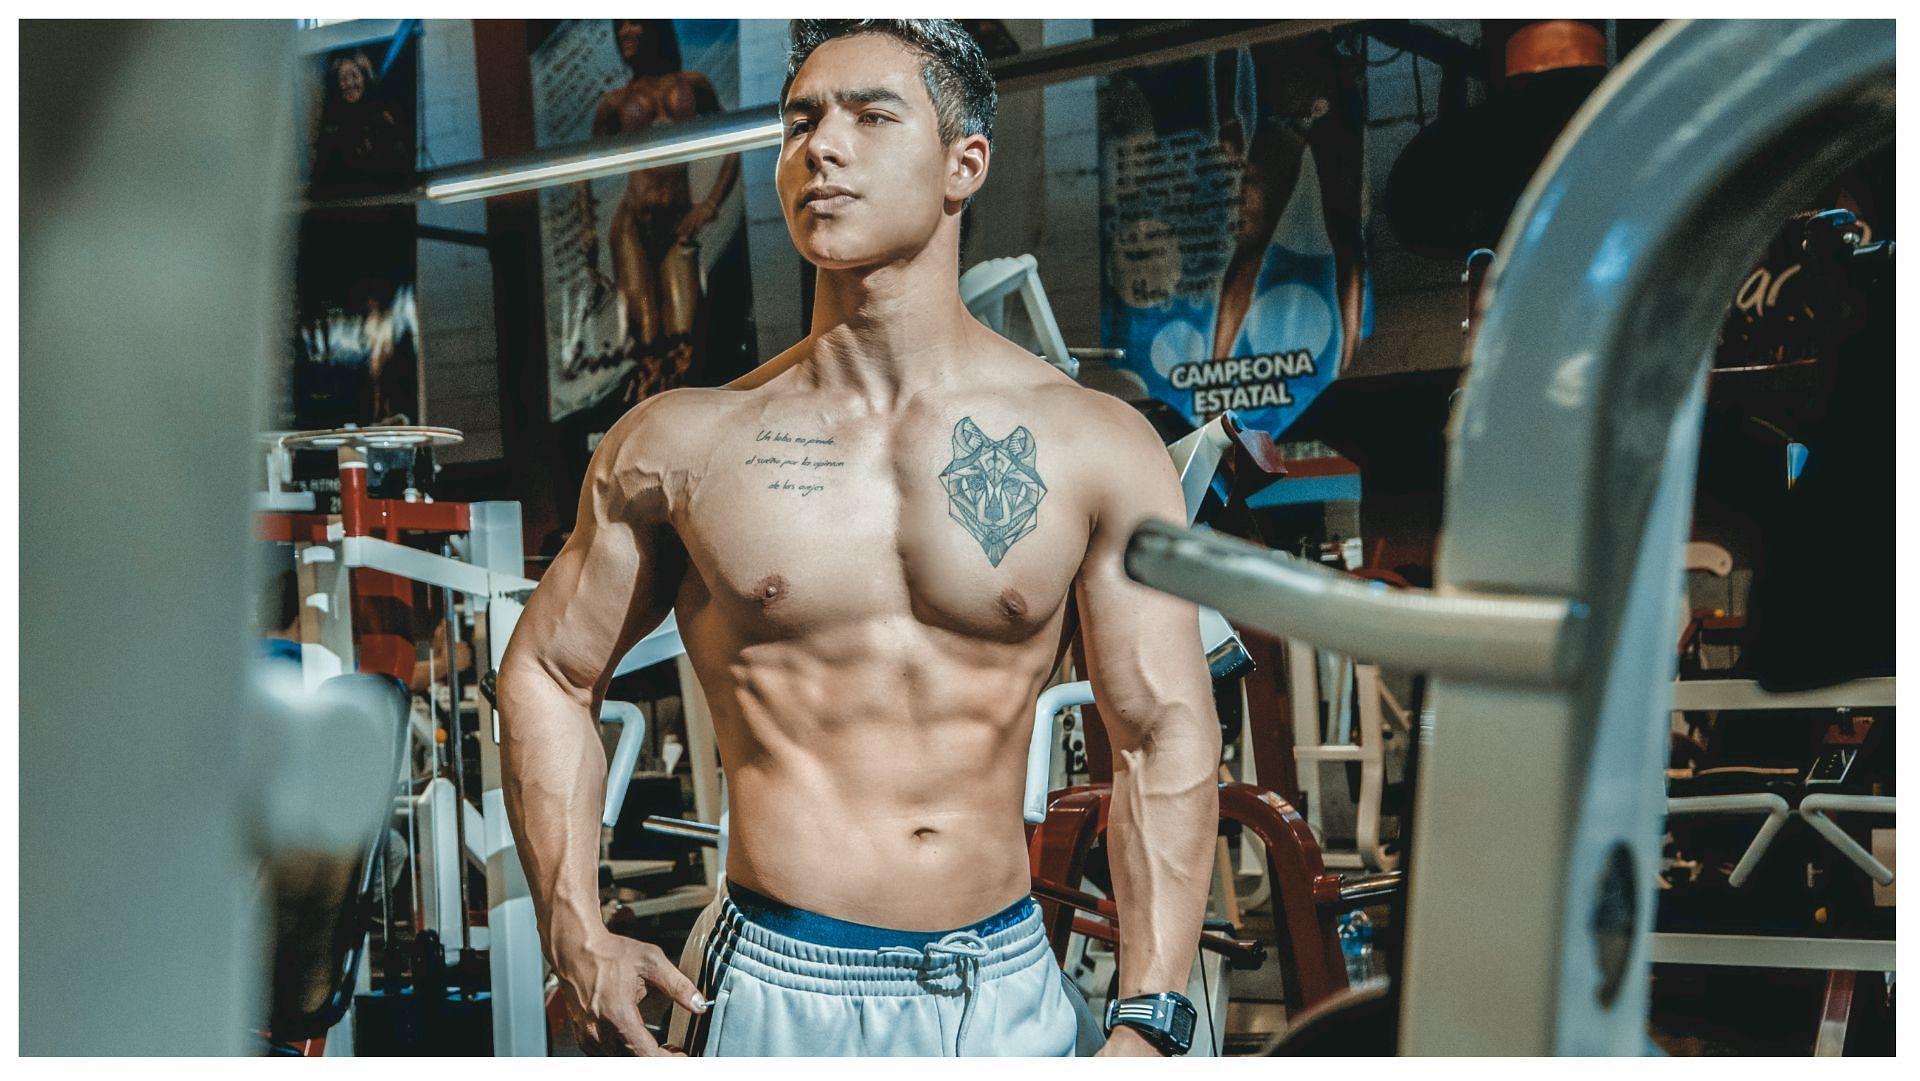 Exercises for the bigger chest without the use of weights. (Image via Pexels/Sabel Blanco)